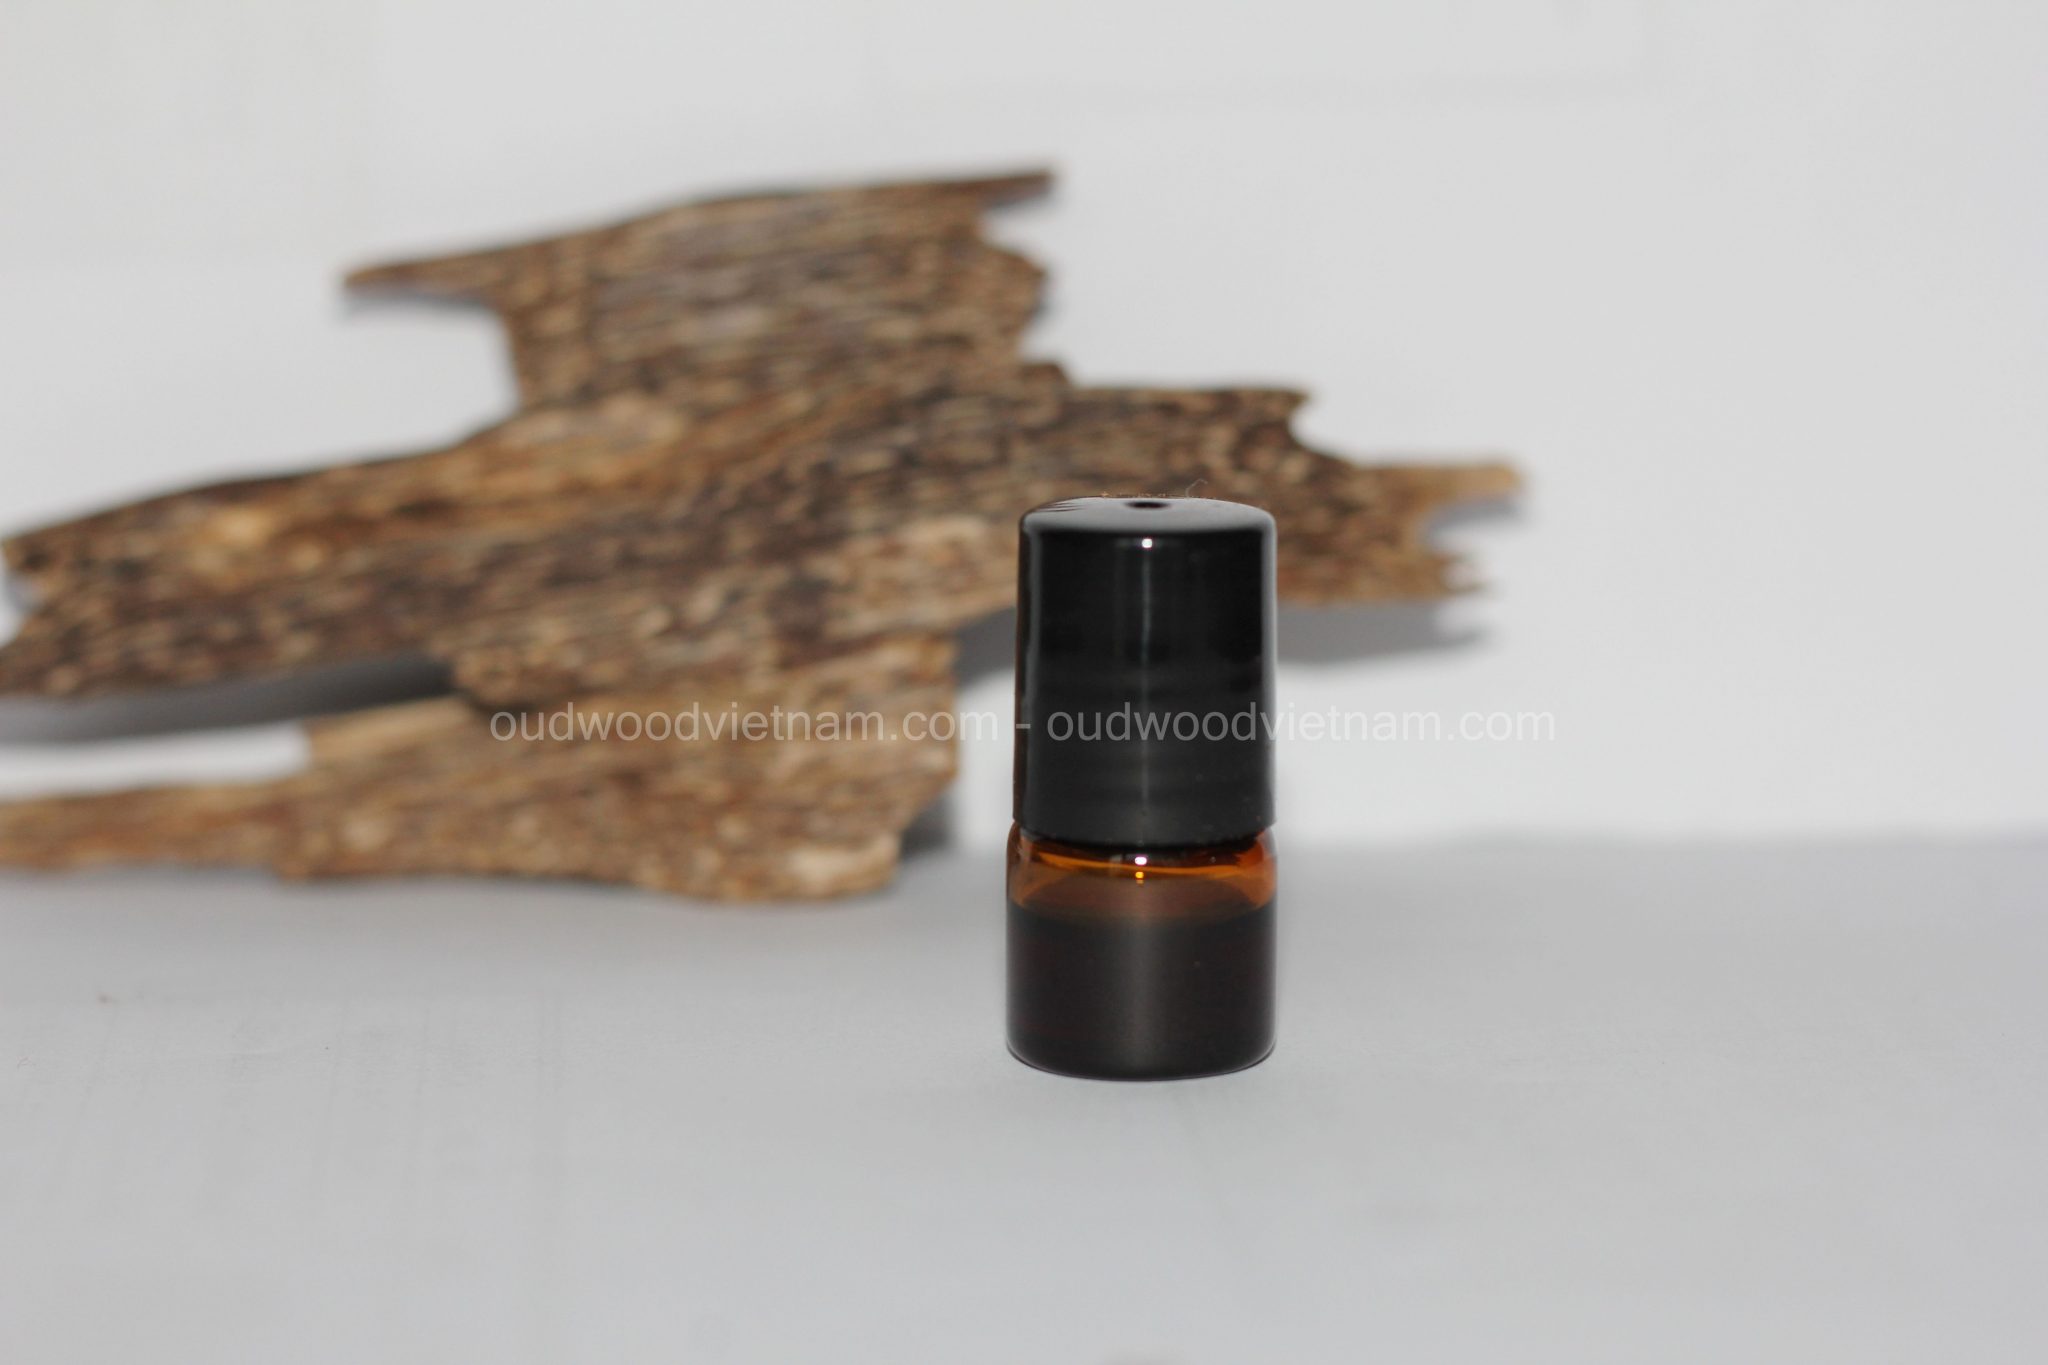 Pure Oud Essential Oil Pure From Agarwood 10ml Imported From